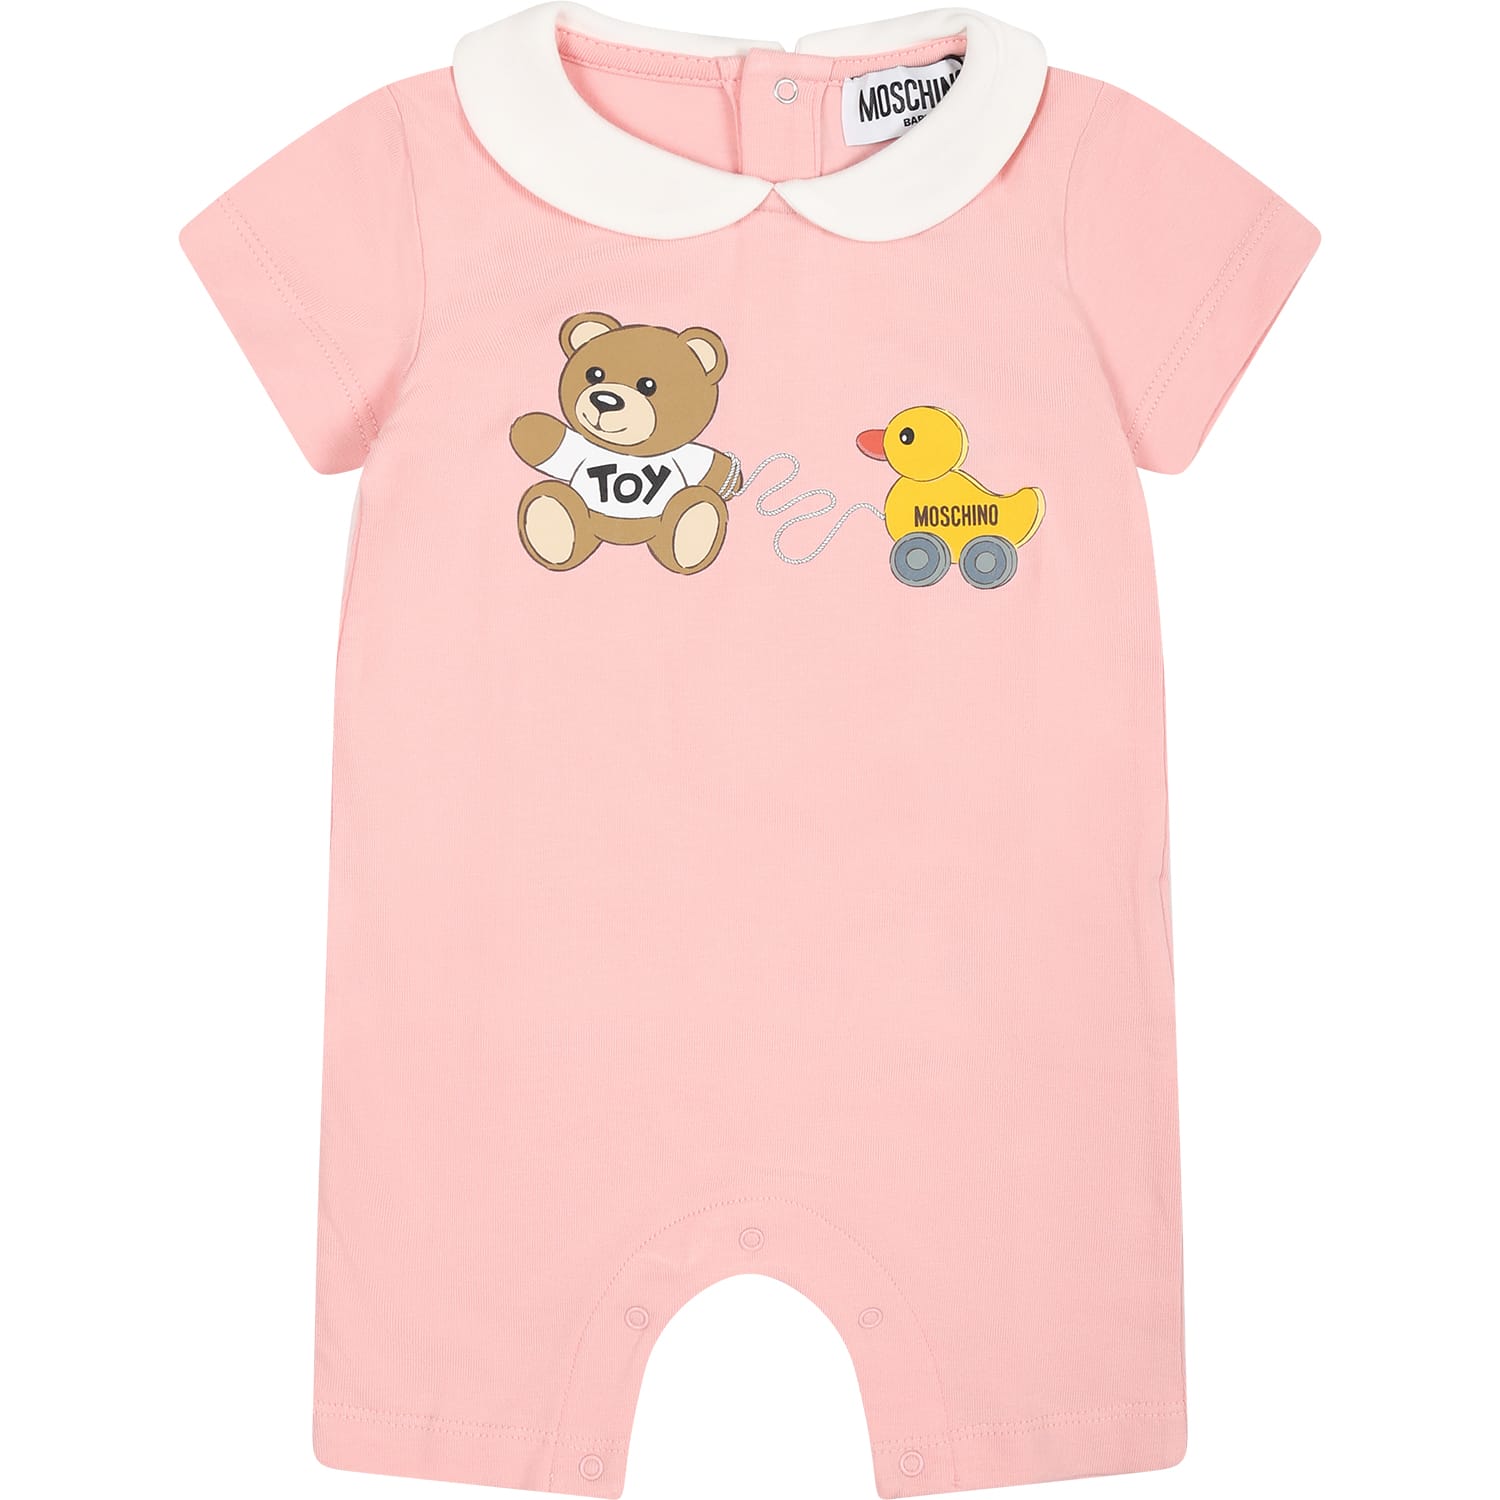 Moschino Pink Bodysuit For Baby Girl With Teddy Bear And Duck